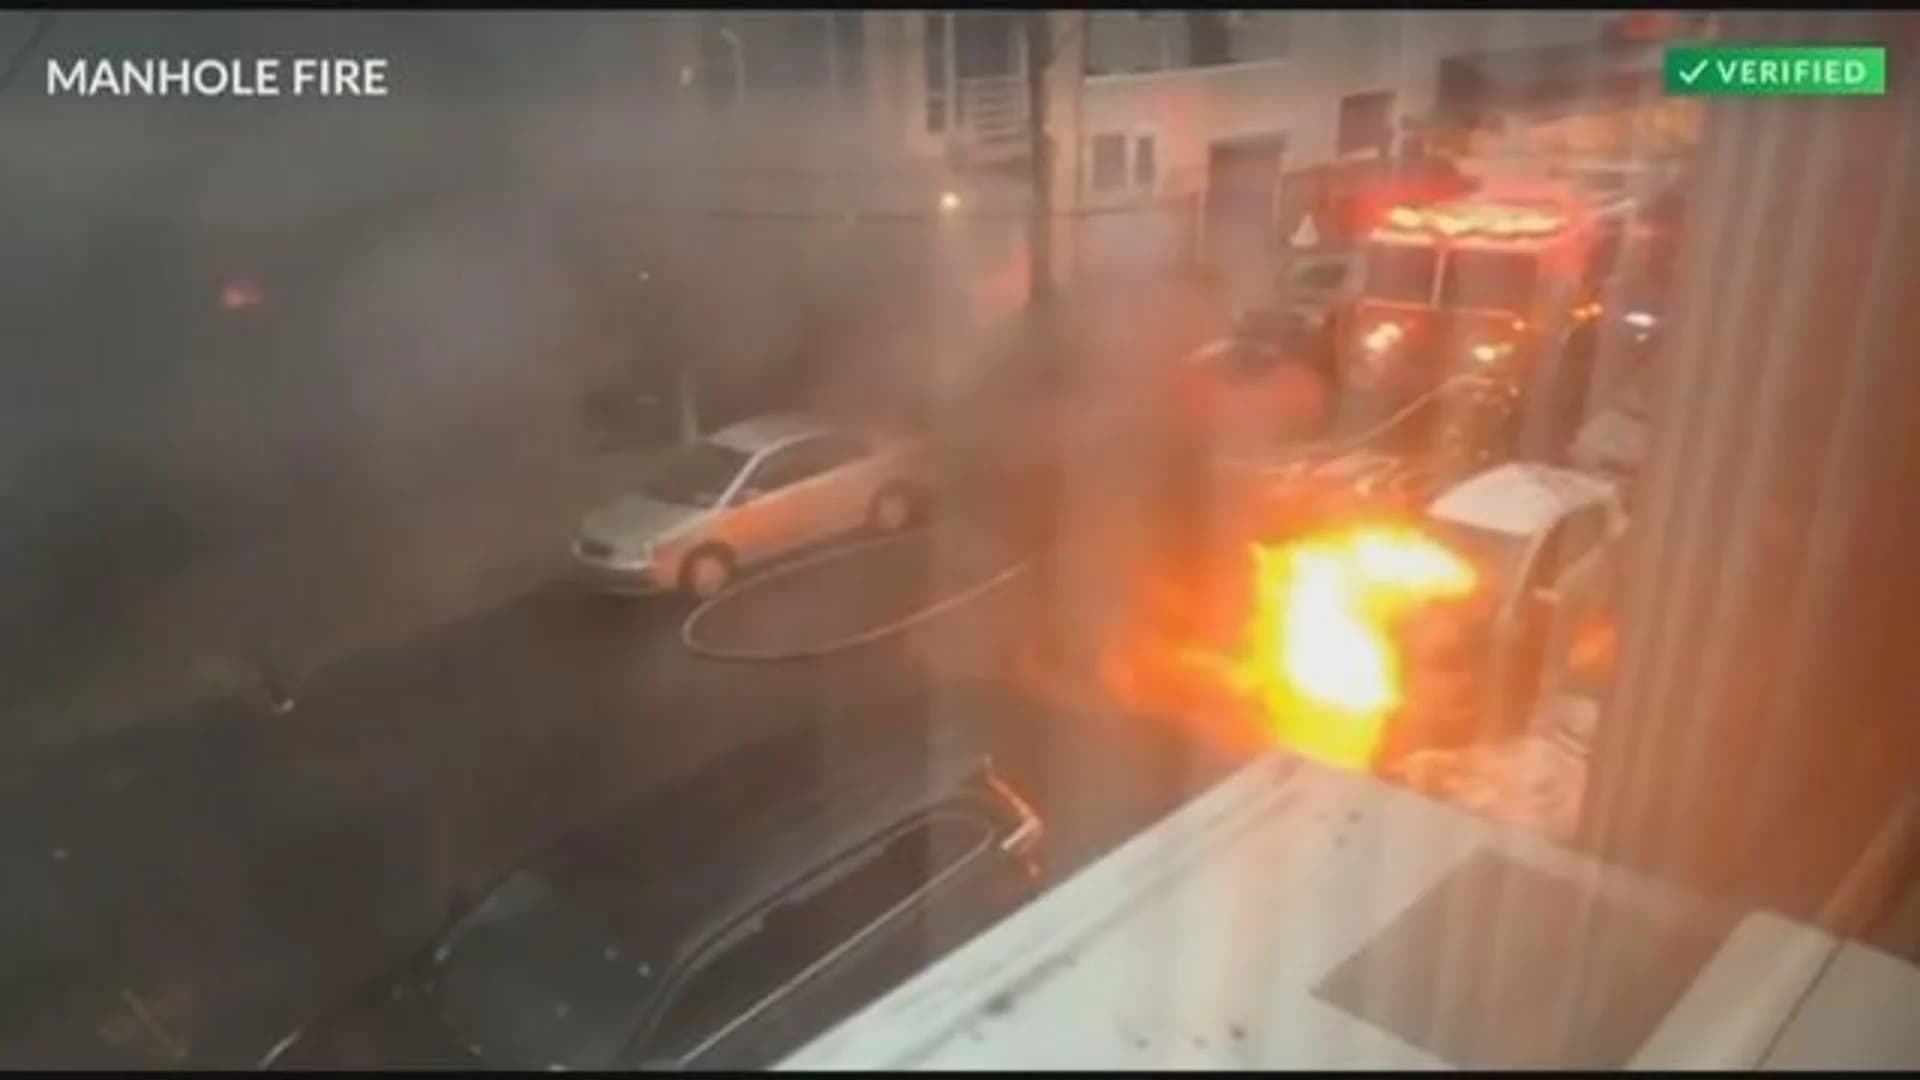 Manhole fire breaks out in Williamsburg